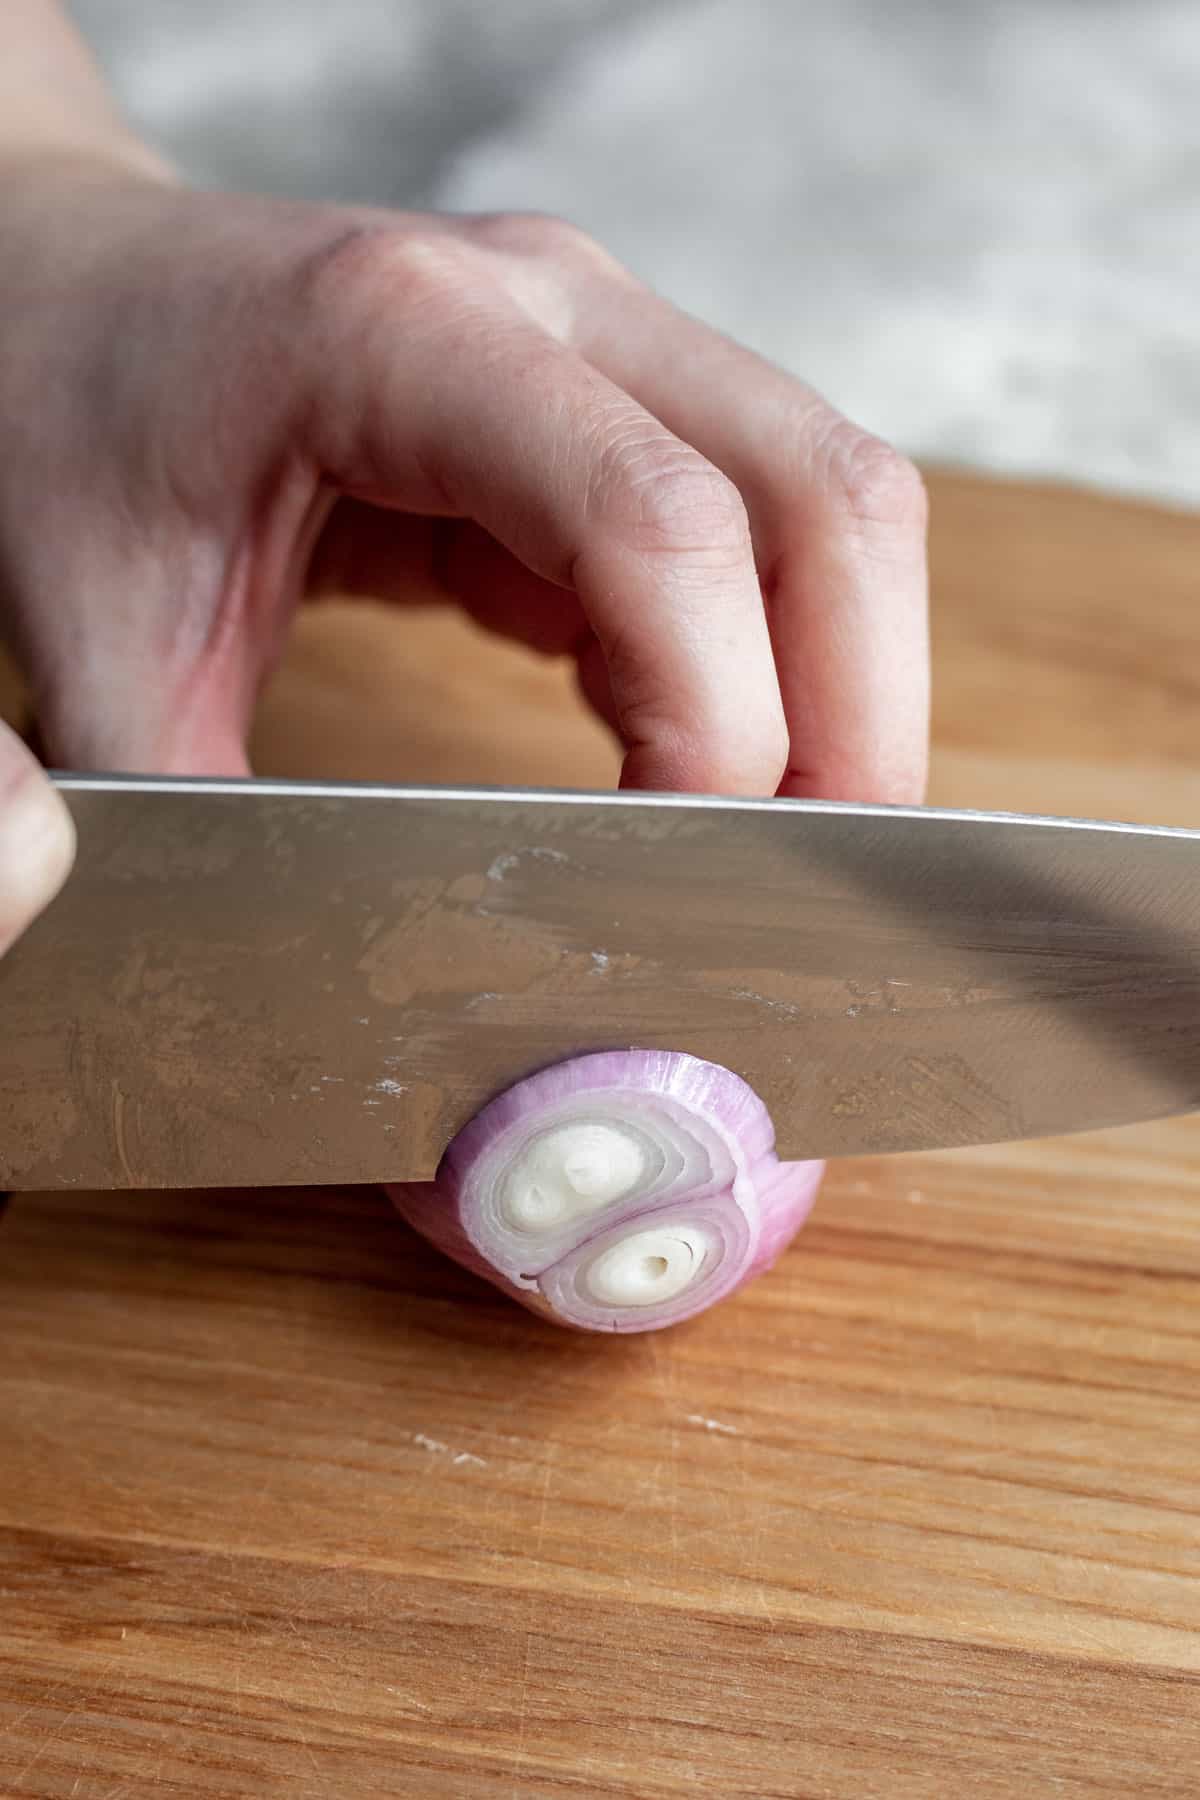 A chef's knife slicing a shallot into rings.